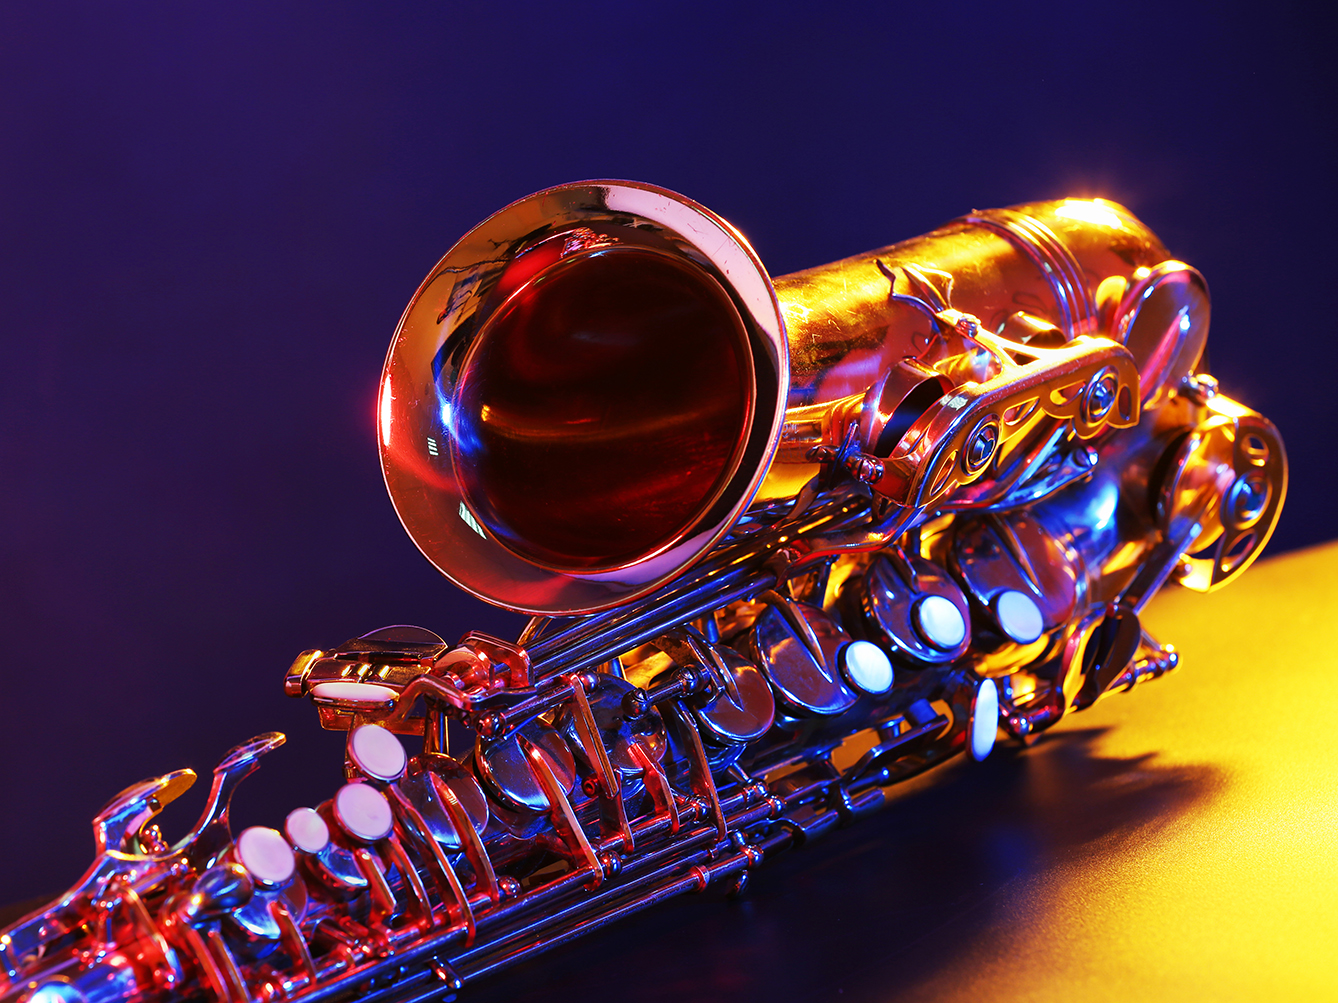 Photo of a saxaphone on it's side with colourful lights reflected on the shiny surface. The background is Alternating solid yellow and purple.